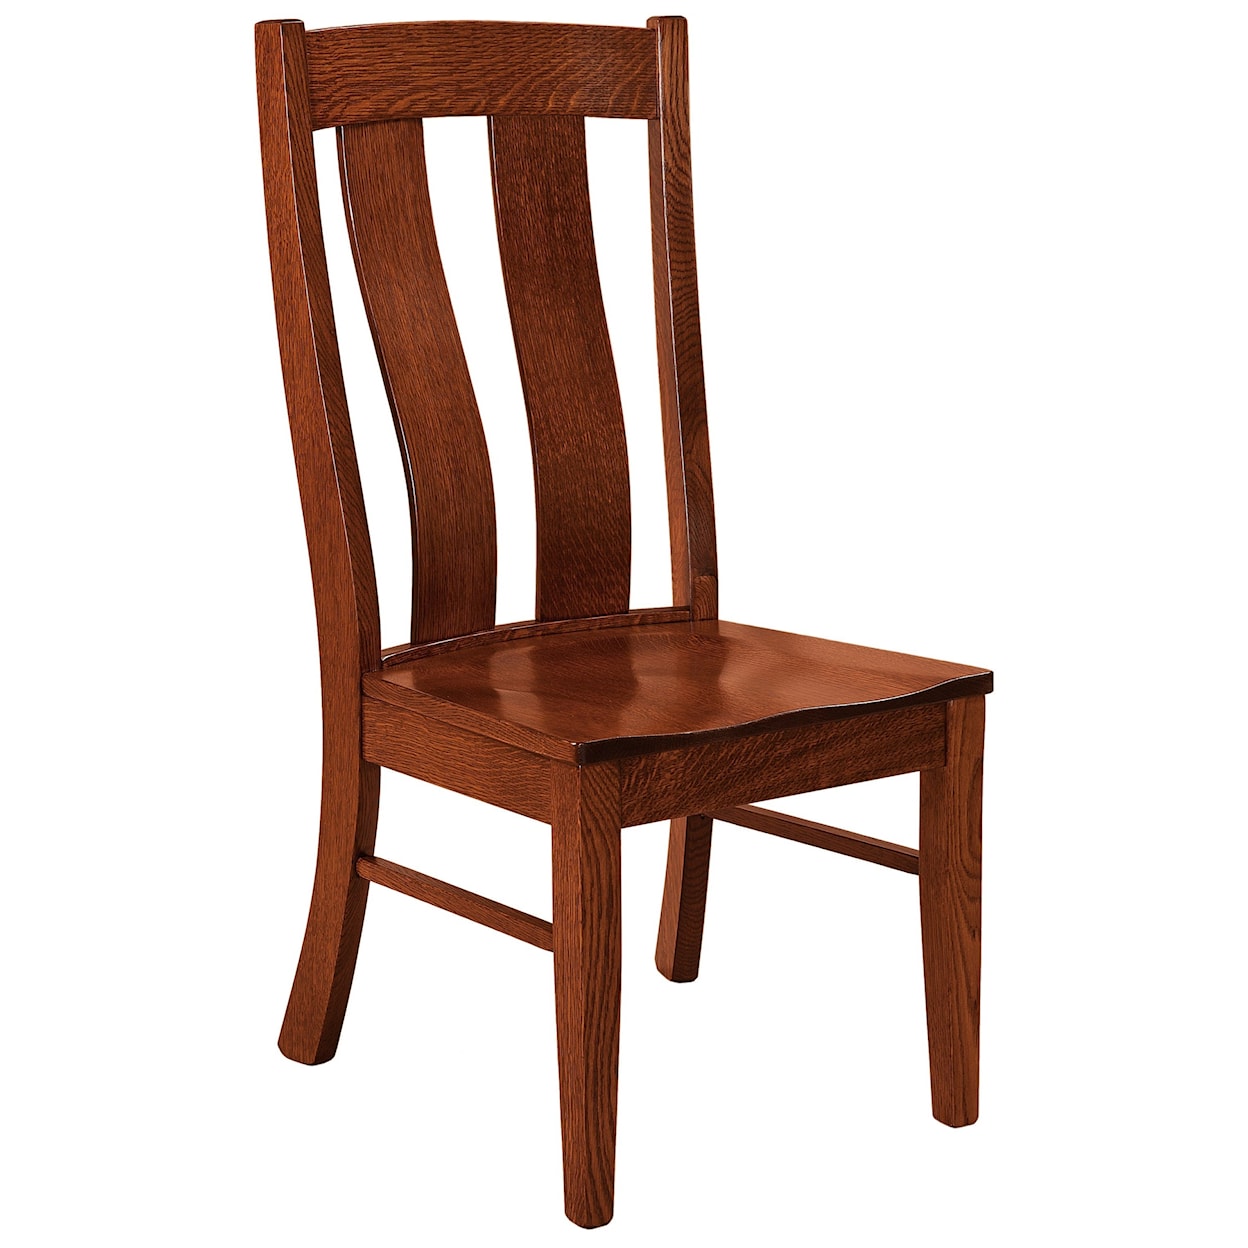 F&N Woodworking Laurie Side Chair - Fabric Seat